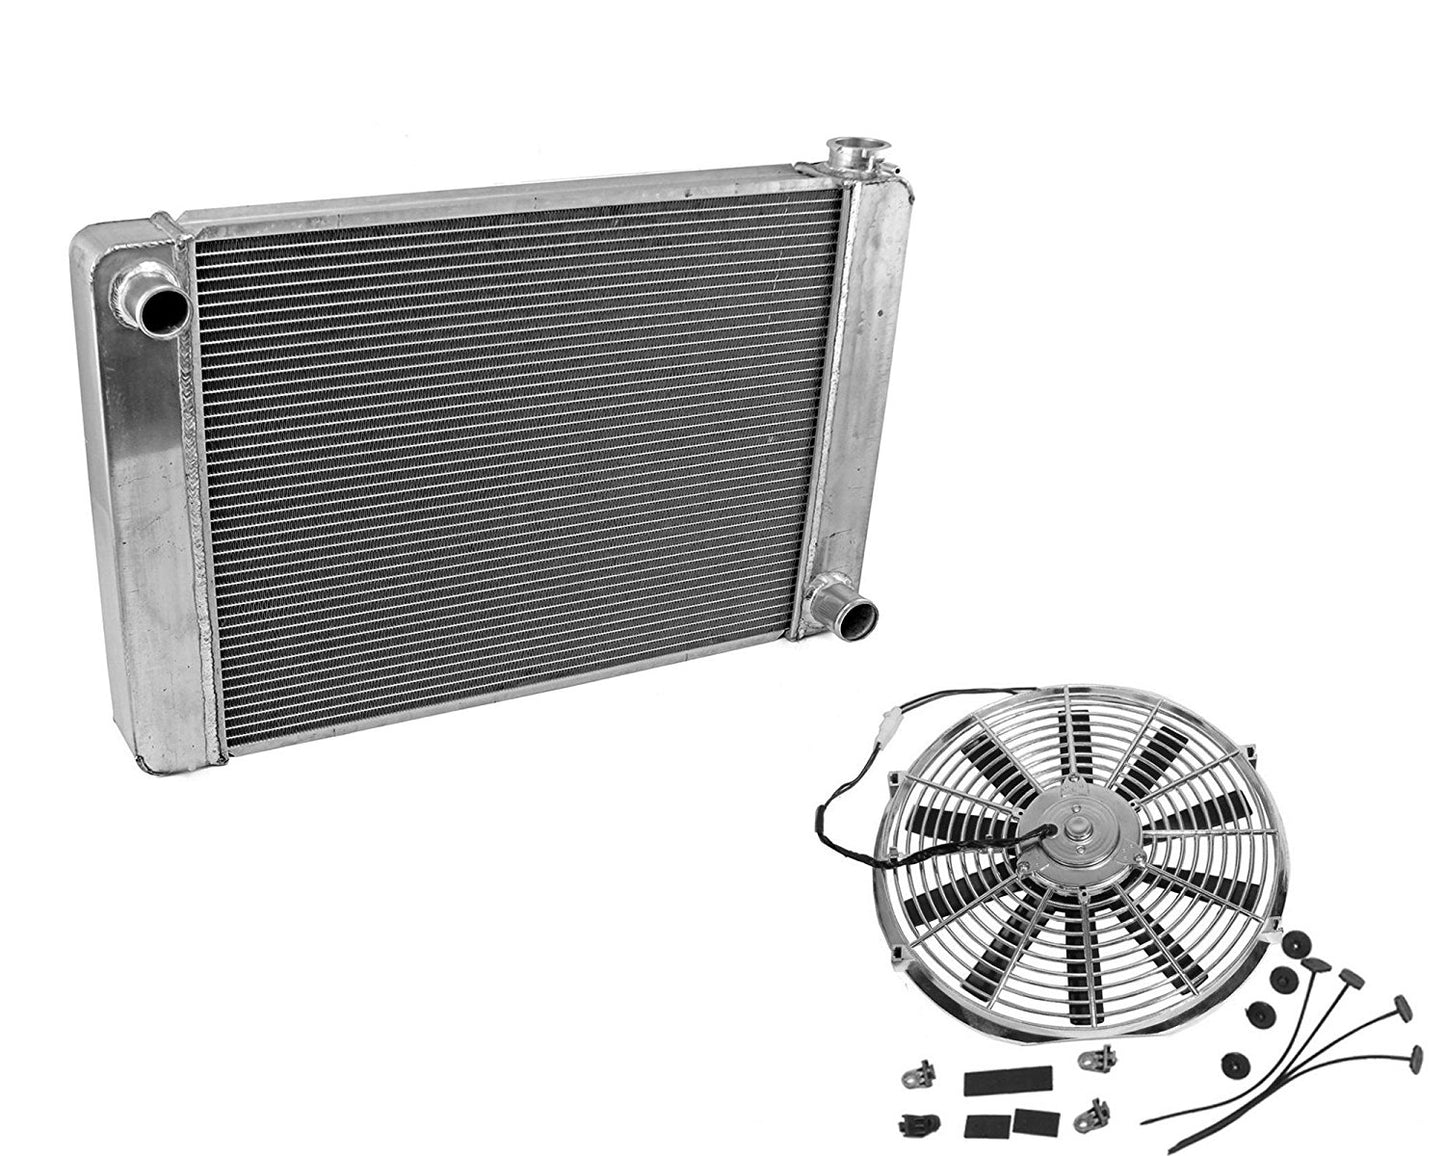 Fabricated Aluminum Radiator 31" x 19" x3" Overall For SBC BBC Chevy GM & Electric Chrome 14" Straight Blade Reversible Cooling Fan